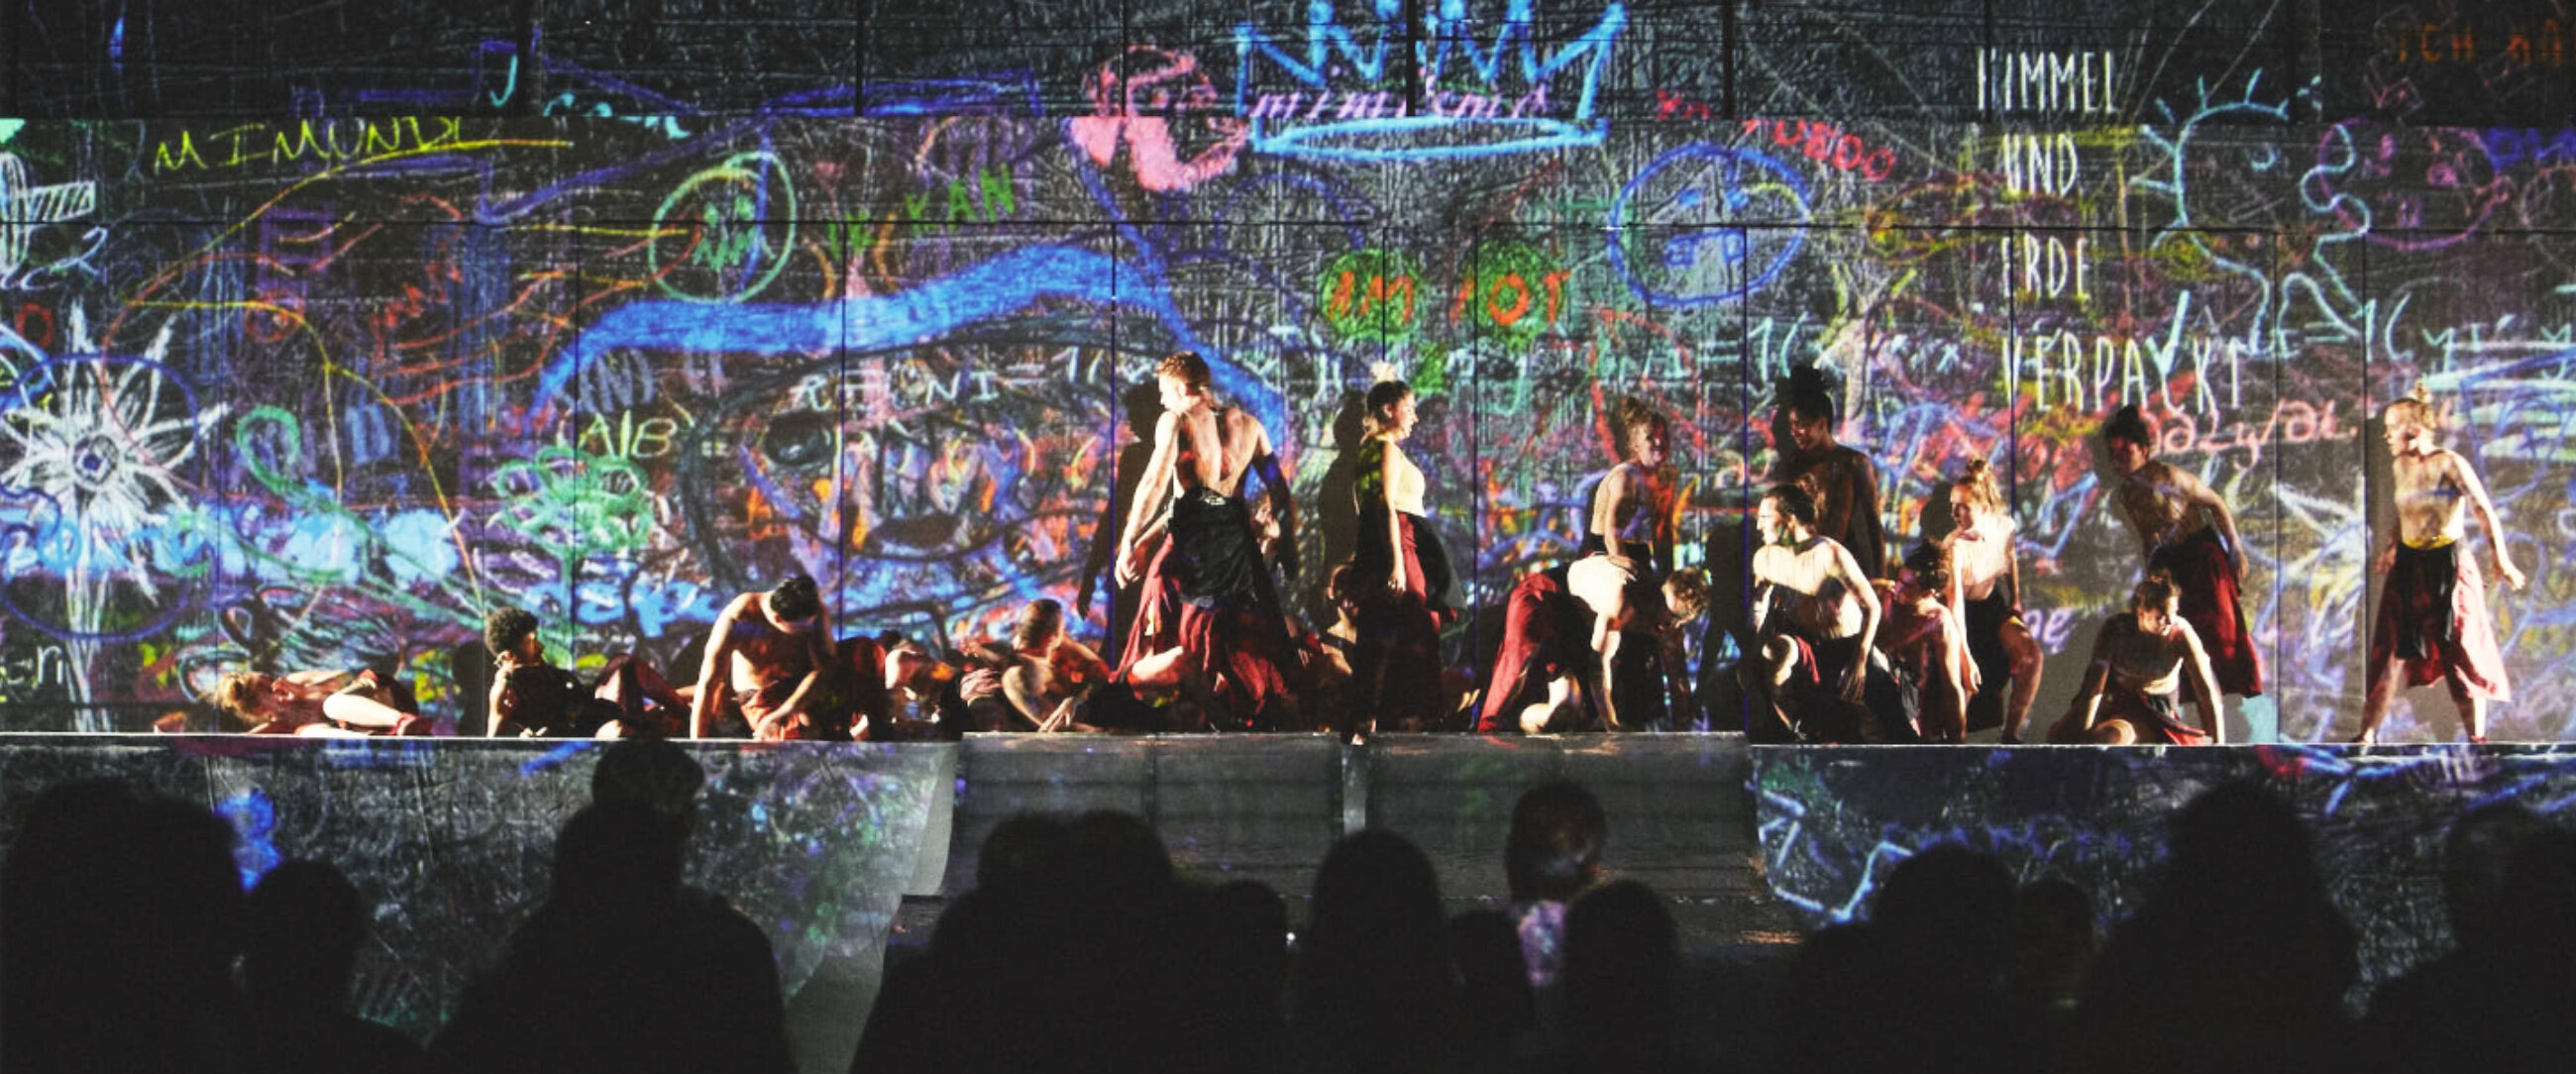 Performing artists in motion on a stage with graffiti backdrop behind them